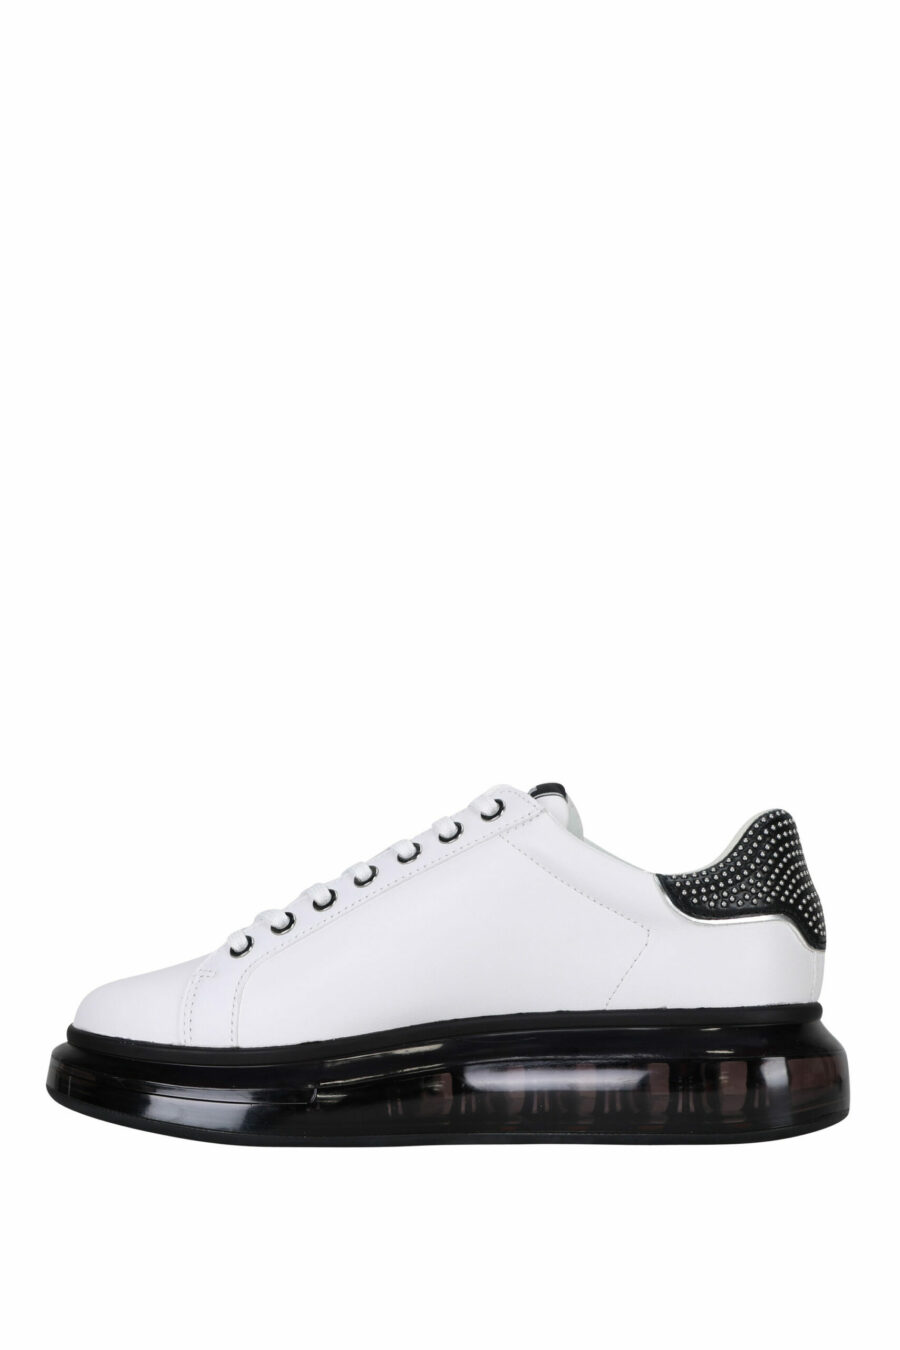 White trainers "kapri fushion" with black sole and logo in outline - 5059529363467 2 scaled